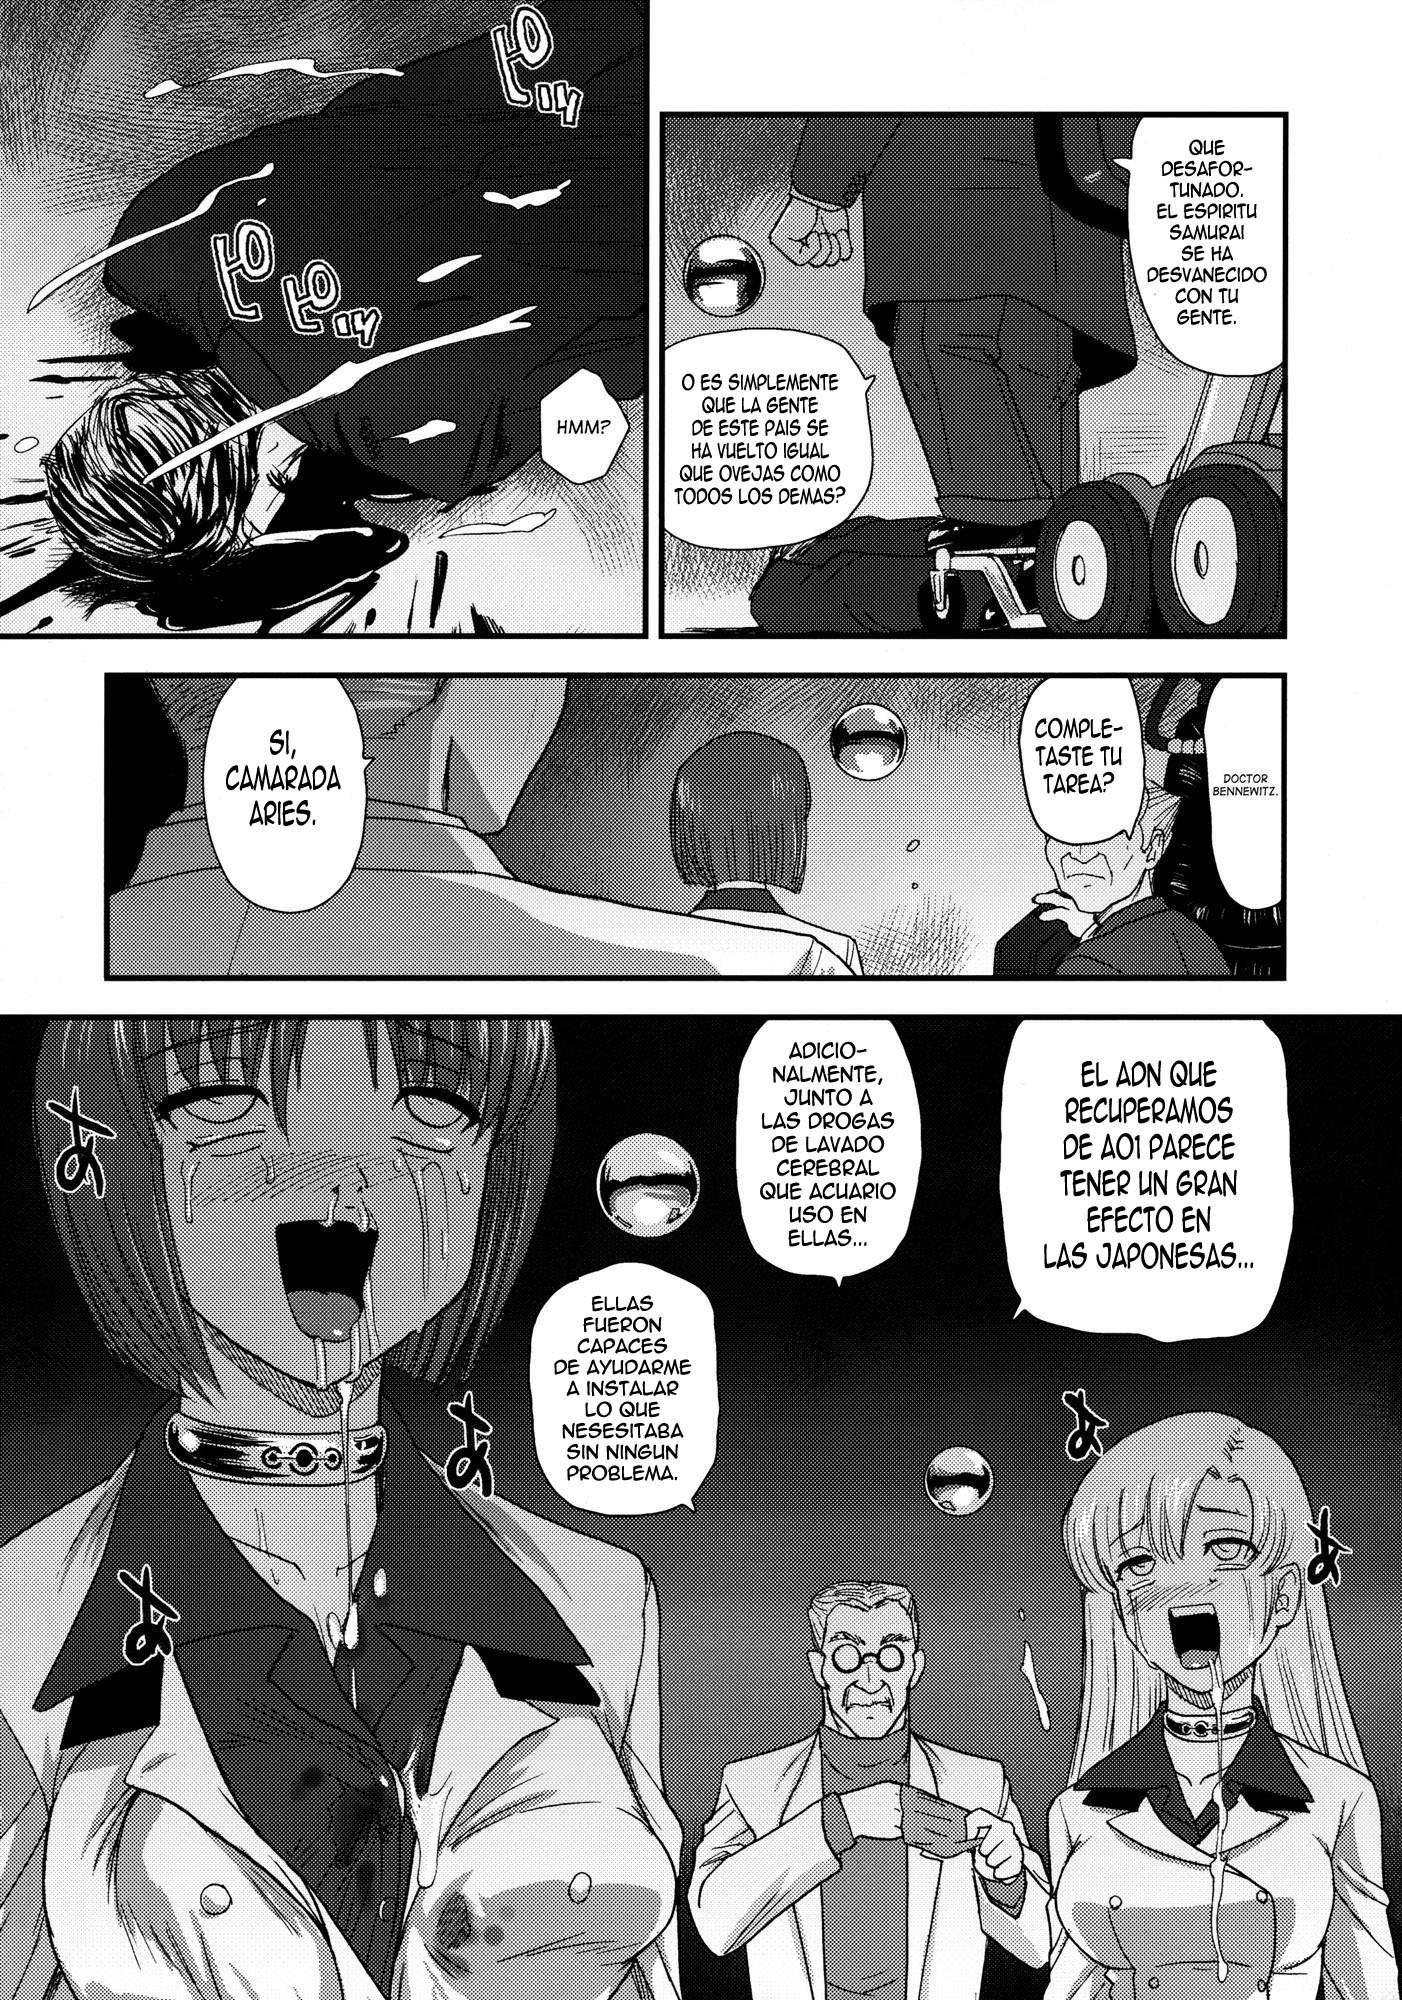 Dulce Report 13 Chapter-13 - 45